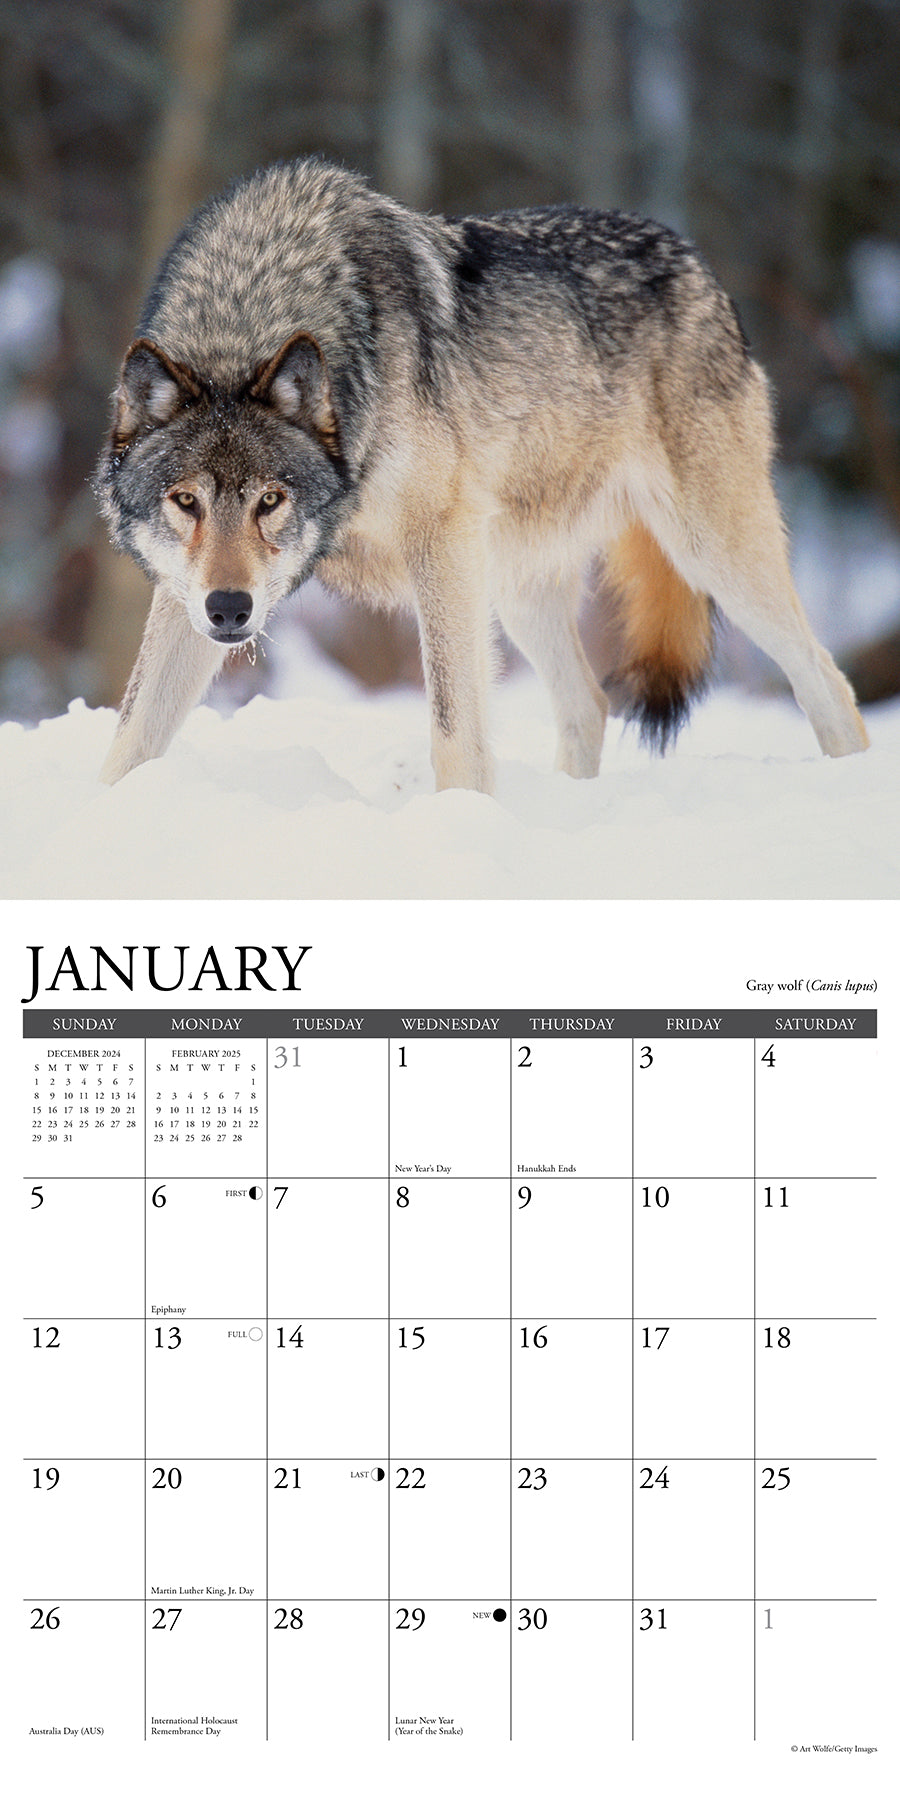 2025 Rocky Mountain Wildlife - Square Wall Calendar (US Only)